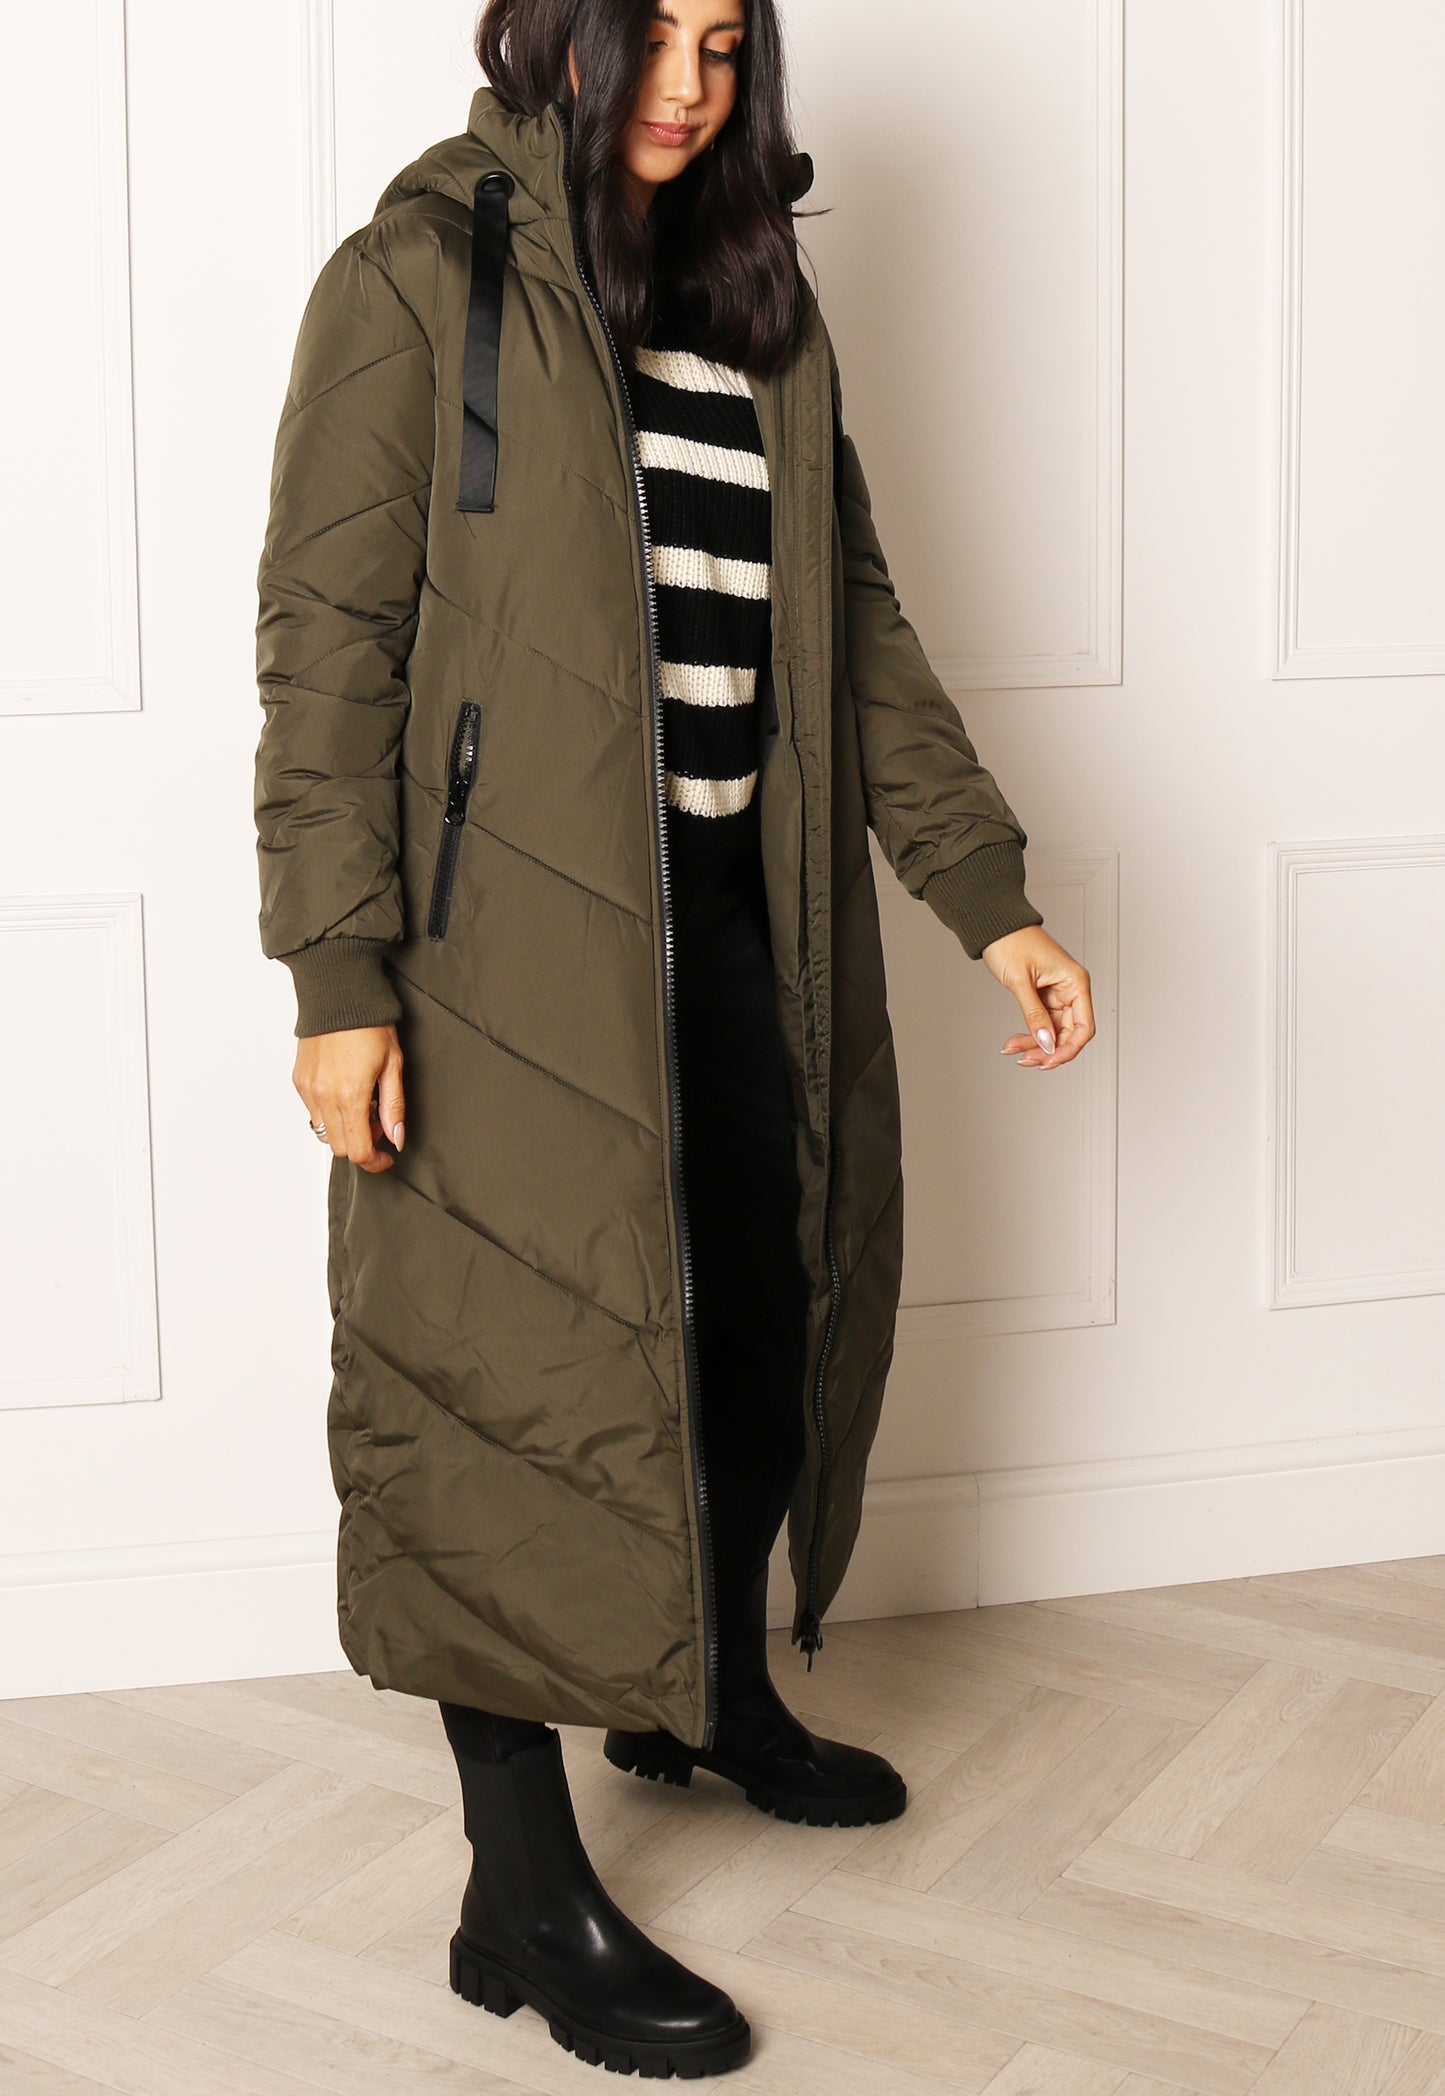 JDY Maxi Skylar Chevron Quilted Hooded Puffer Coat in Khaki Green - One Nation Clothing